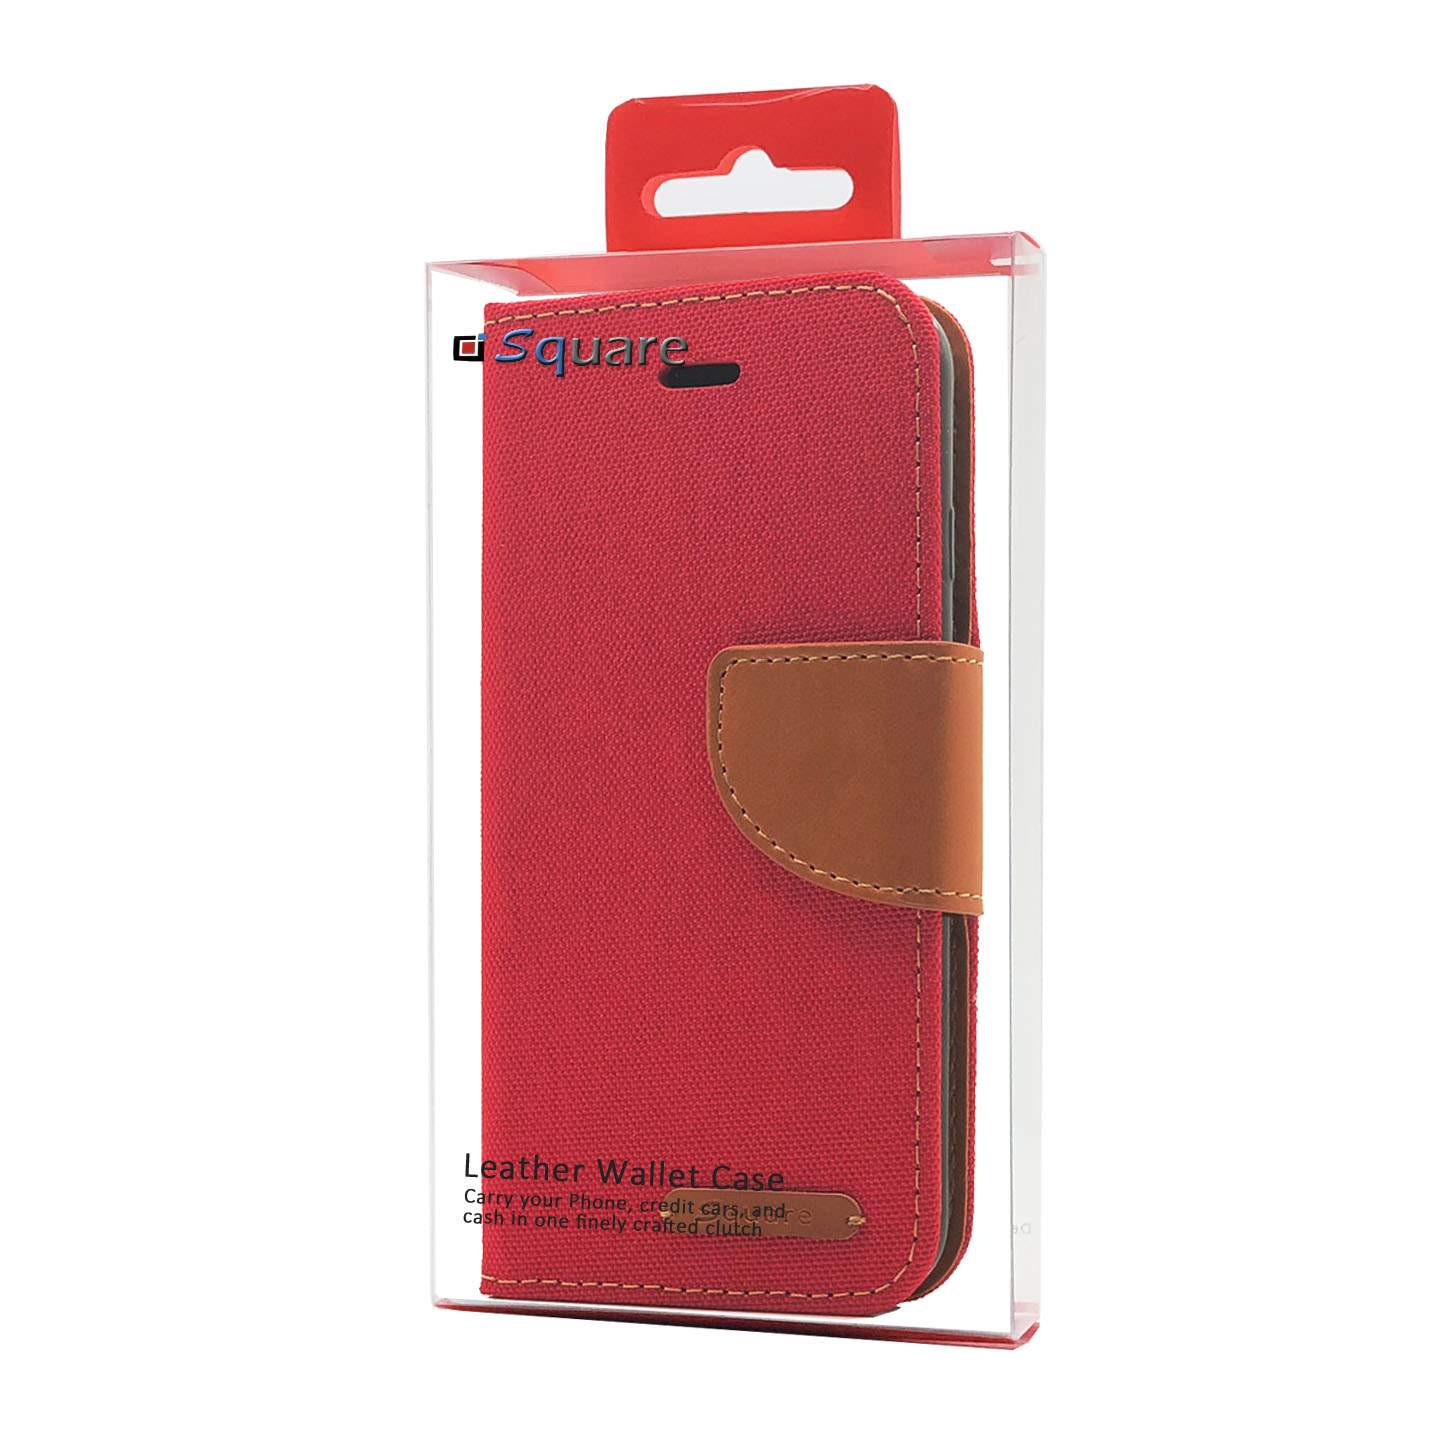 Mesh wallet Case for iPhone 11 Pro Max (red)